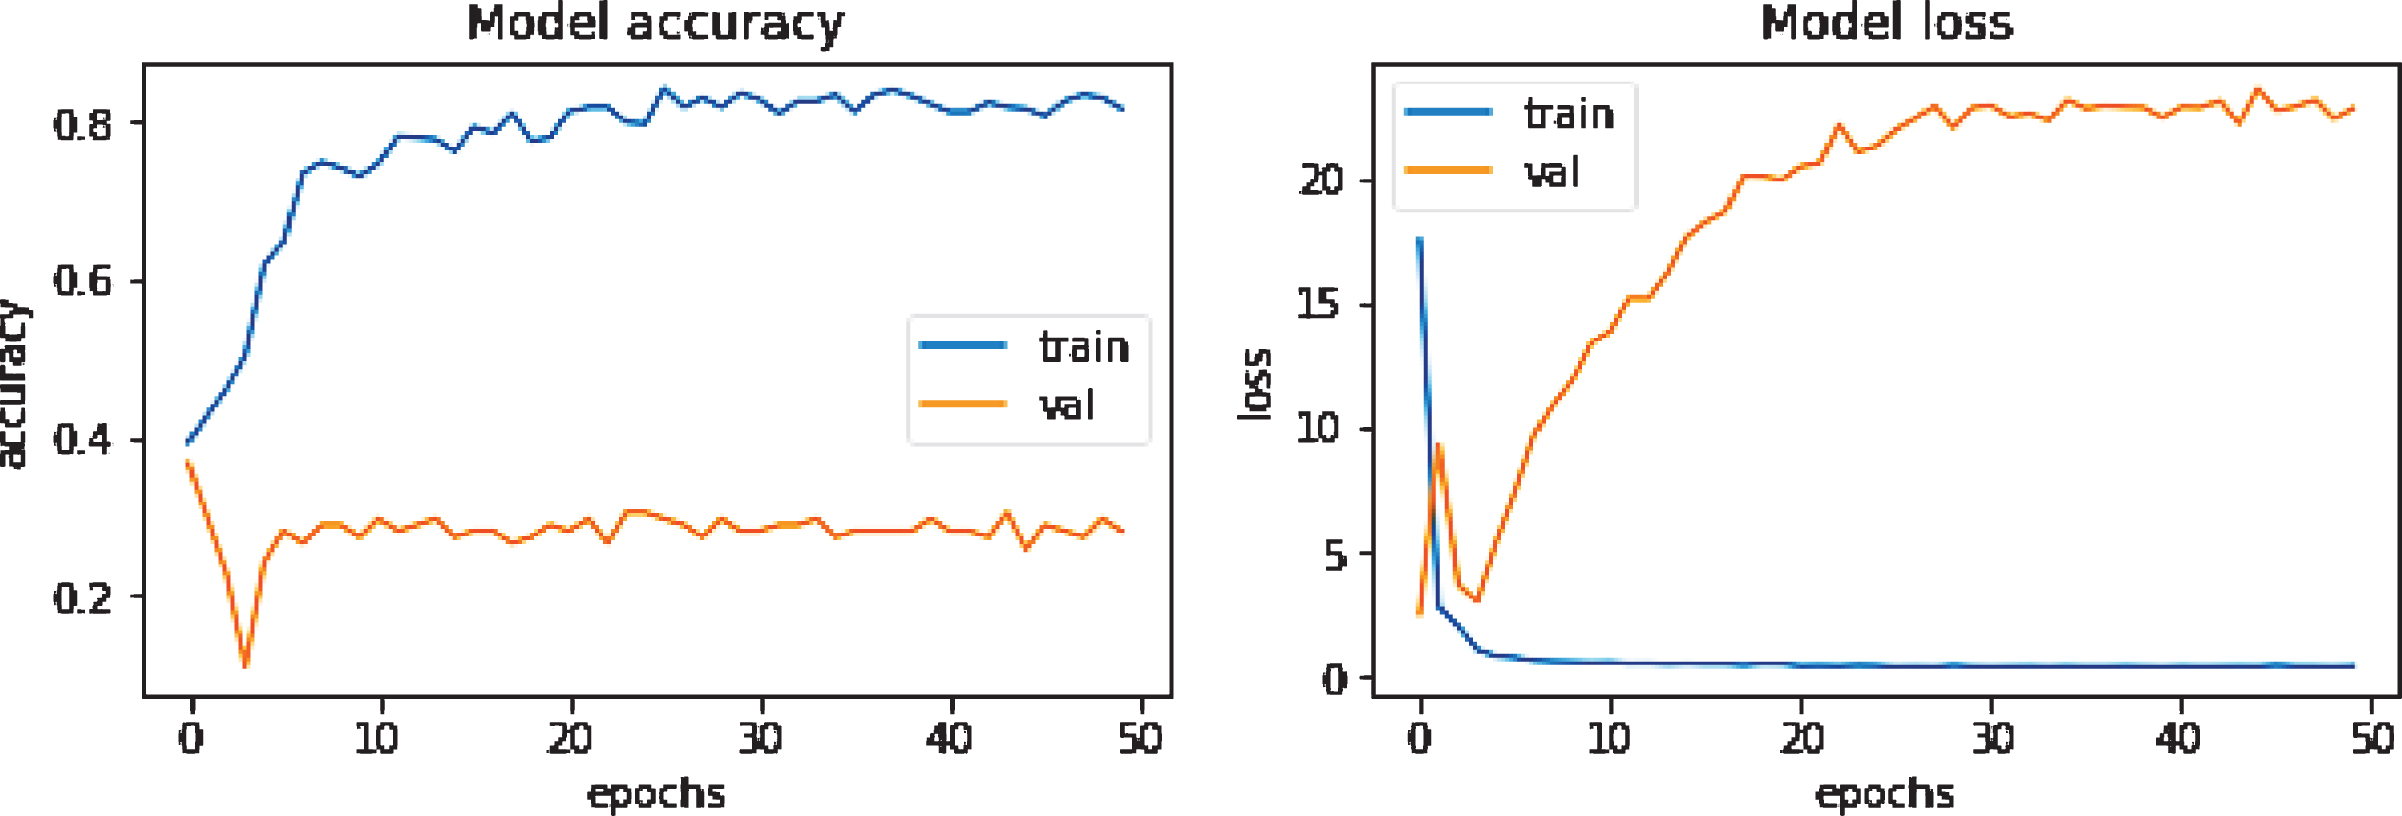 An example of an overfitted accuracy/loss curve while training DenseNet201 without data augmentation.